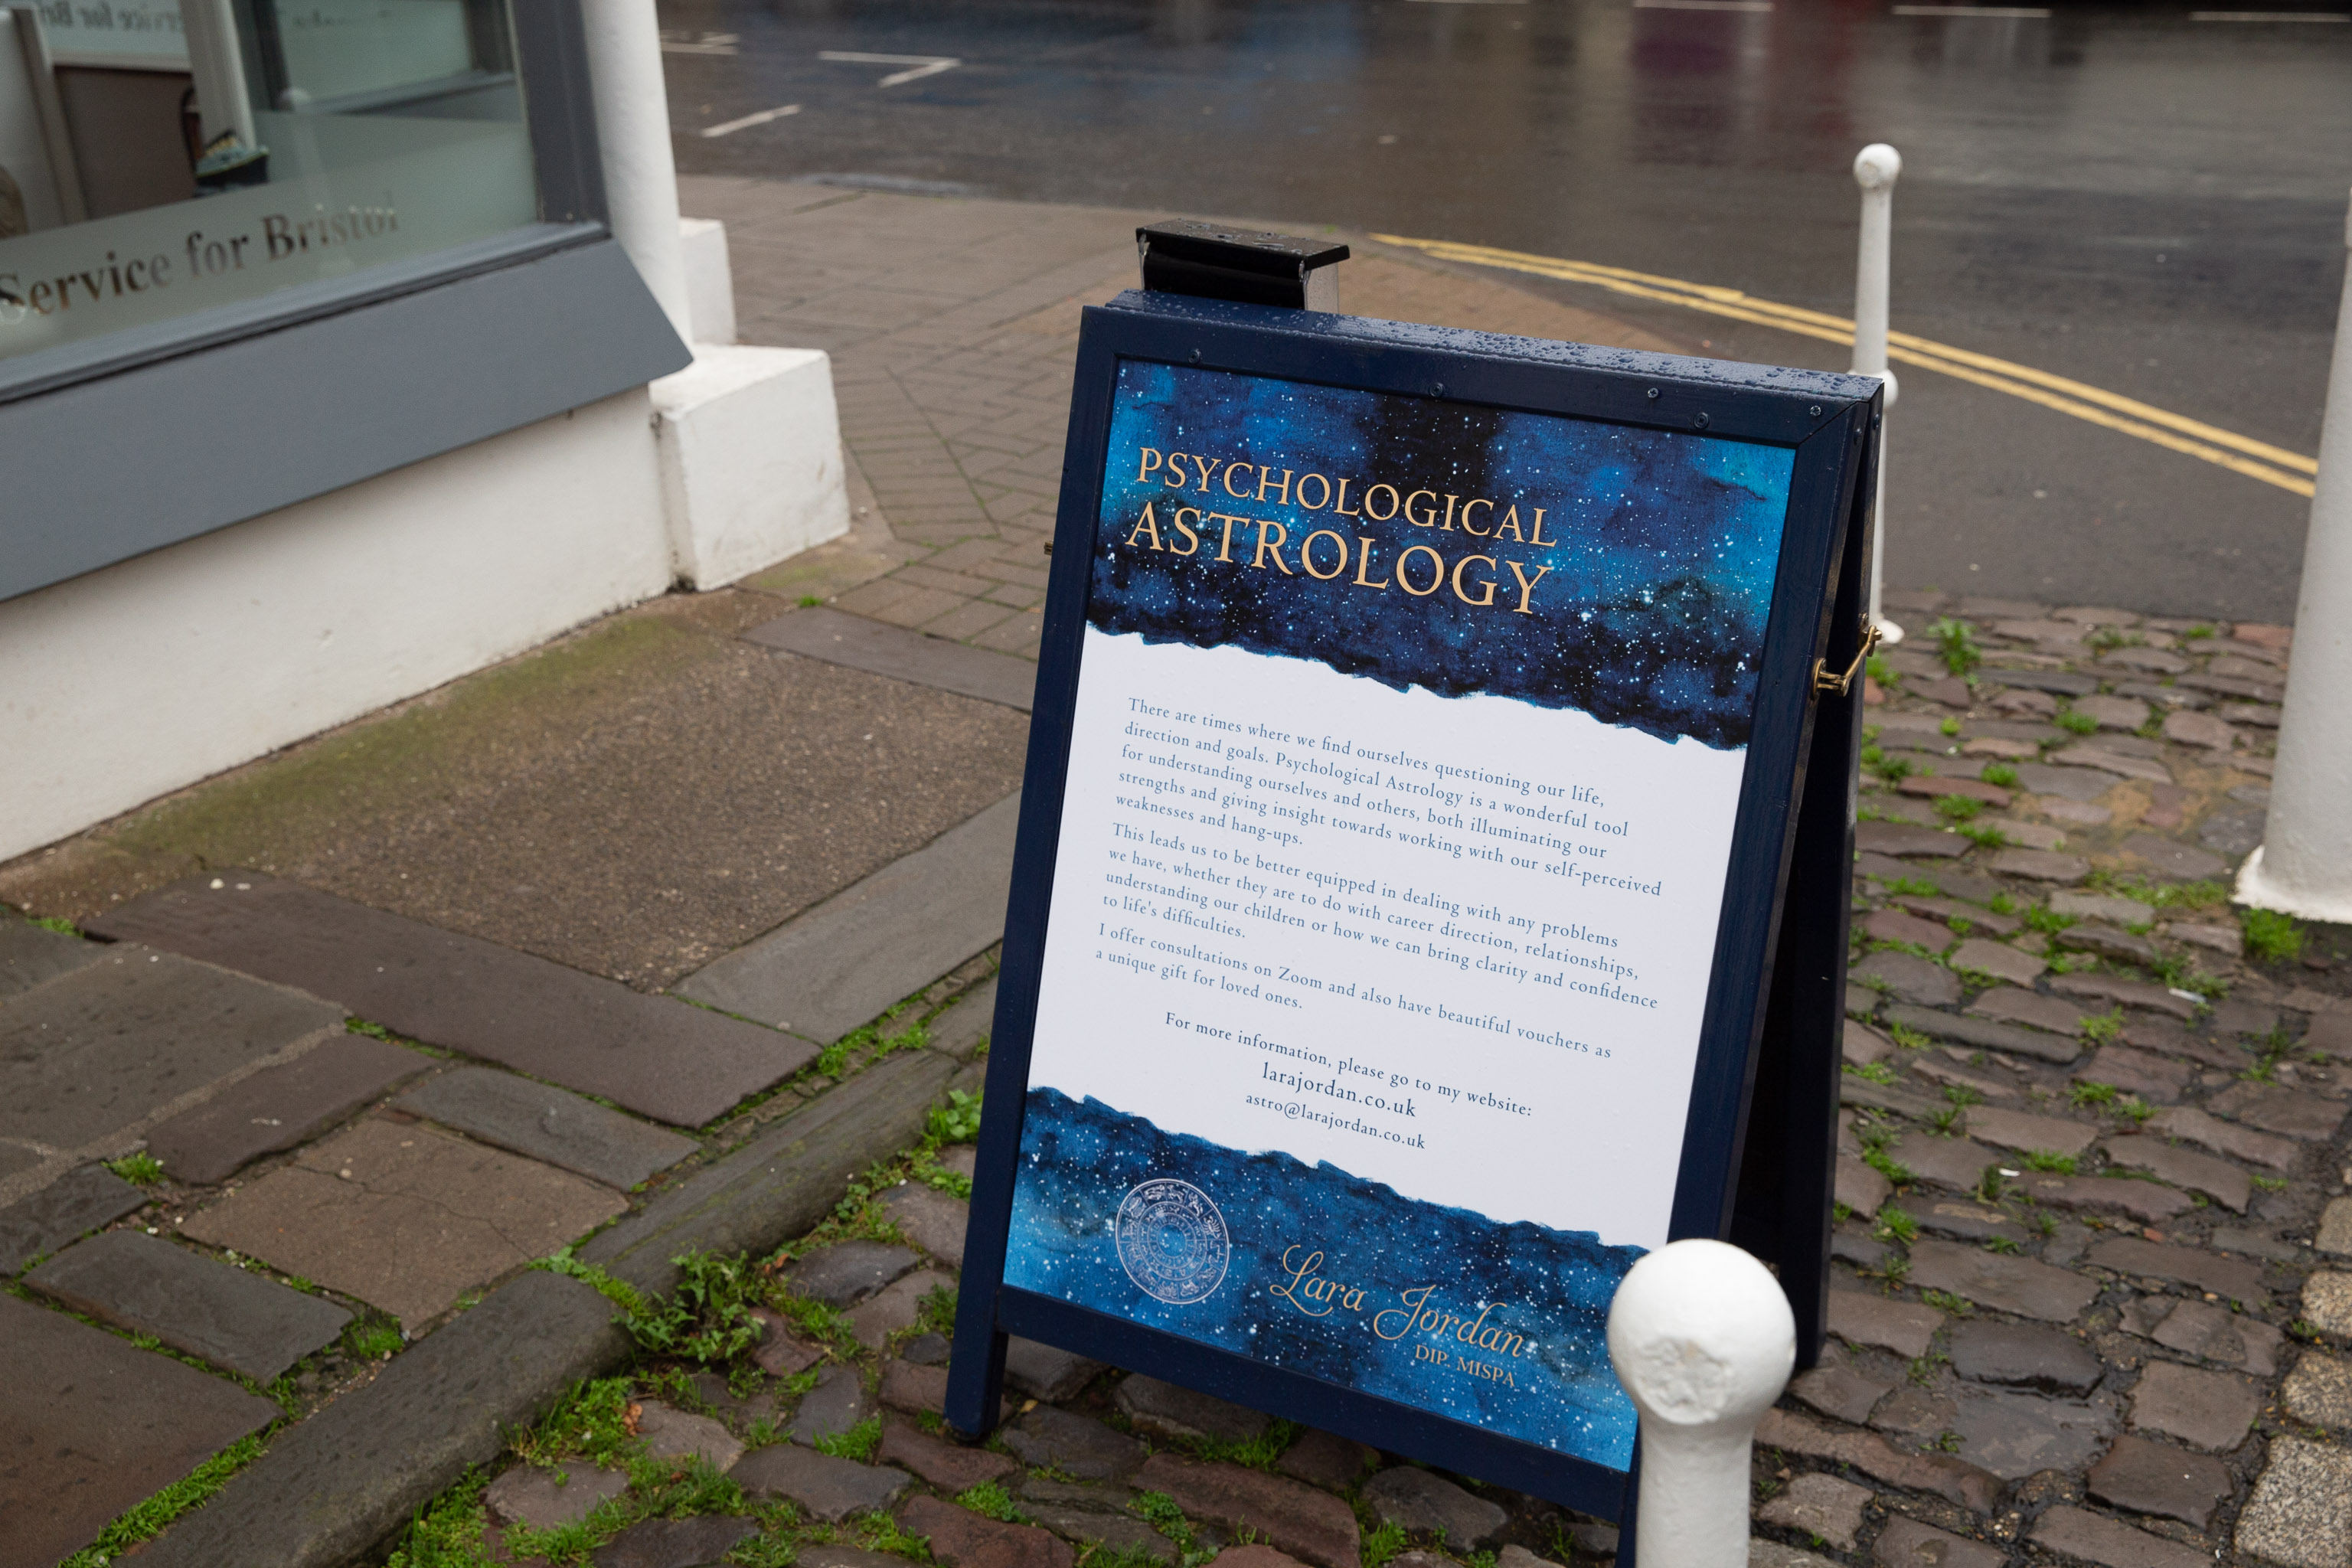 Psychological Astrology
For some reason I'm reminded of the time I was browsing the sadly-now-gone Avon Books (which used to occupy 4a Waterloo Street, next to Kitchen Art...